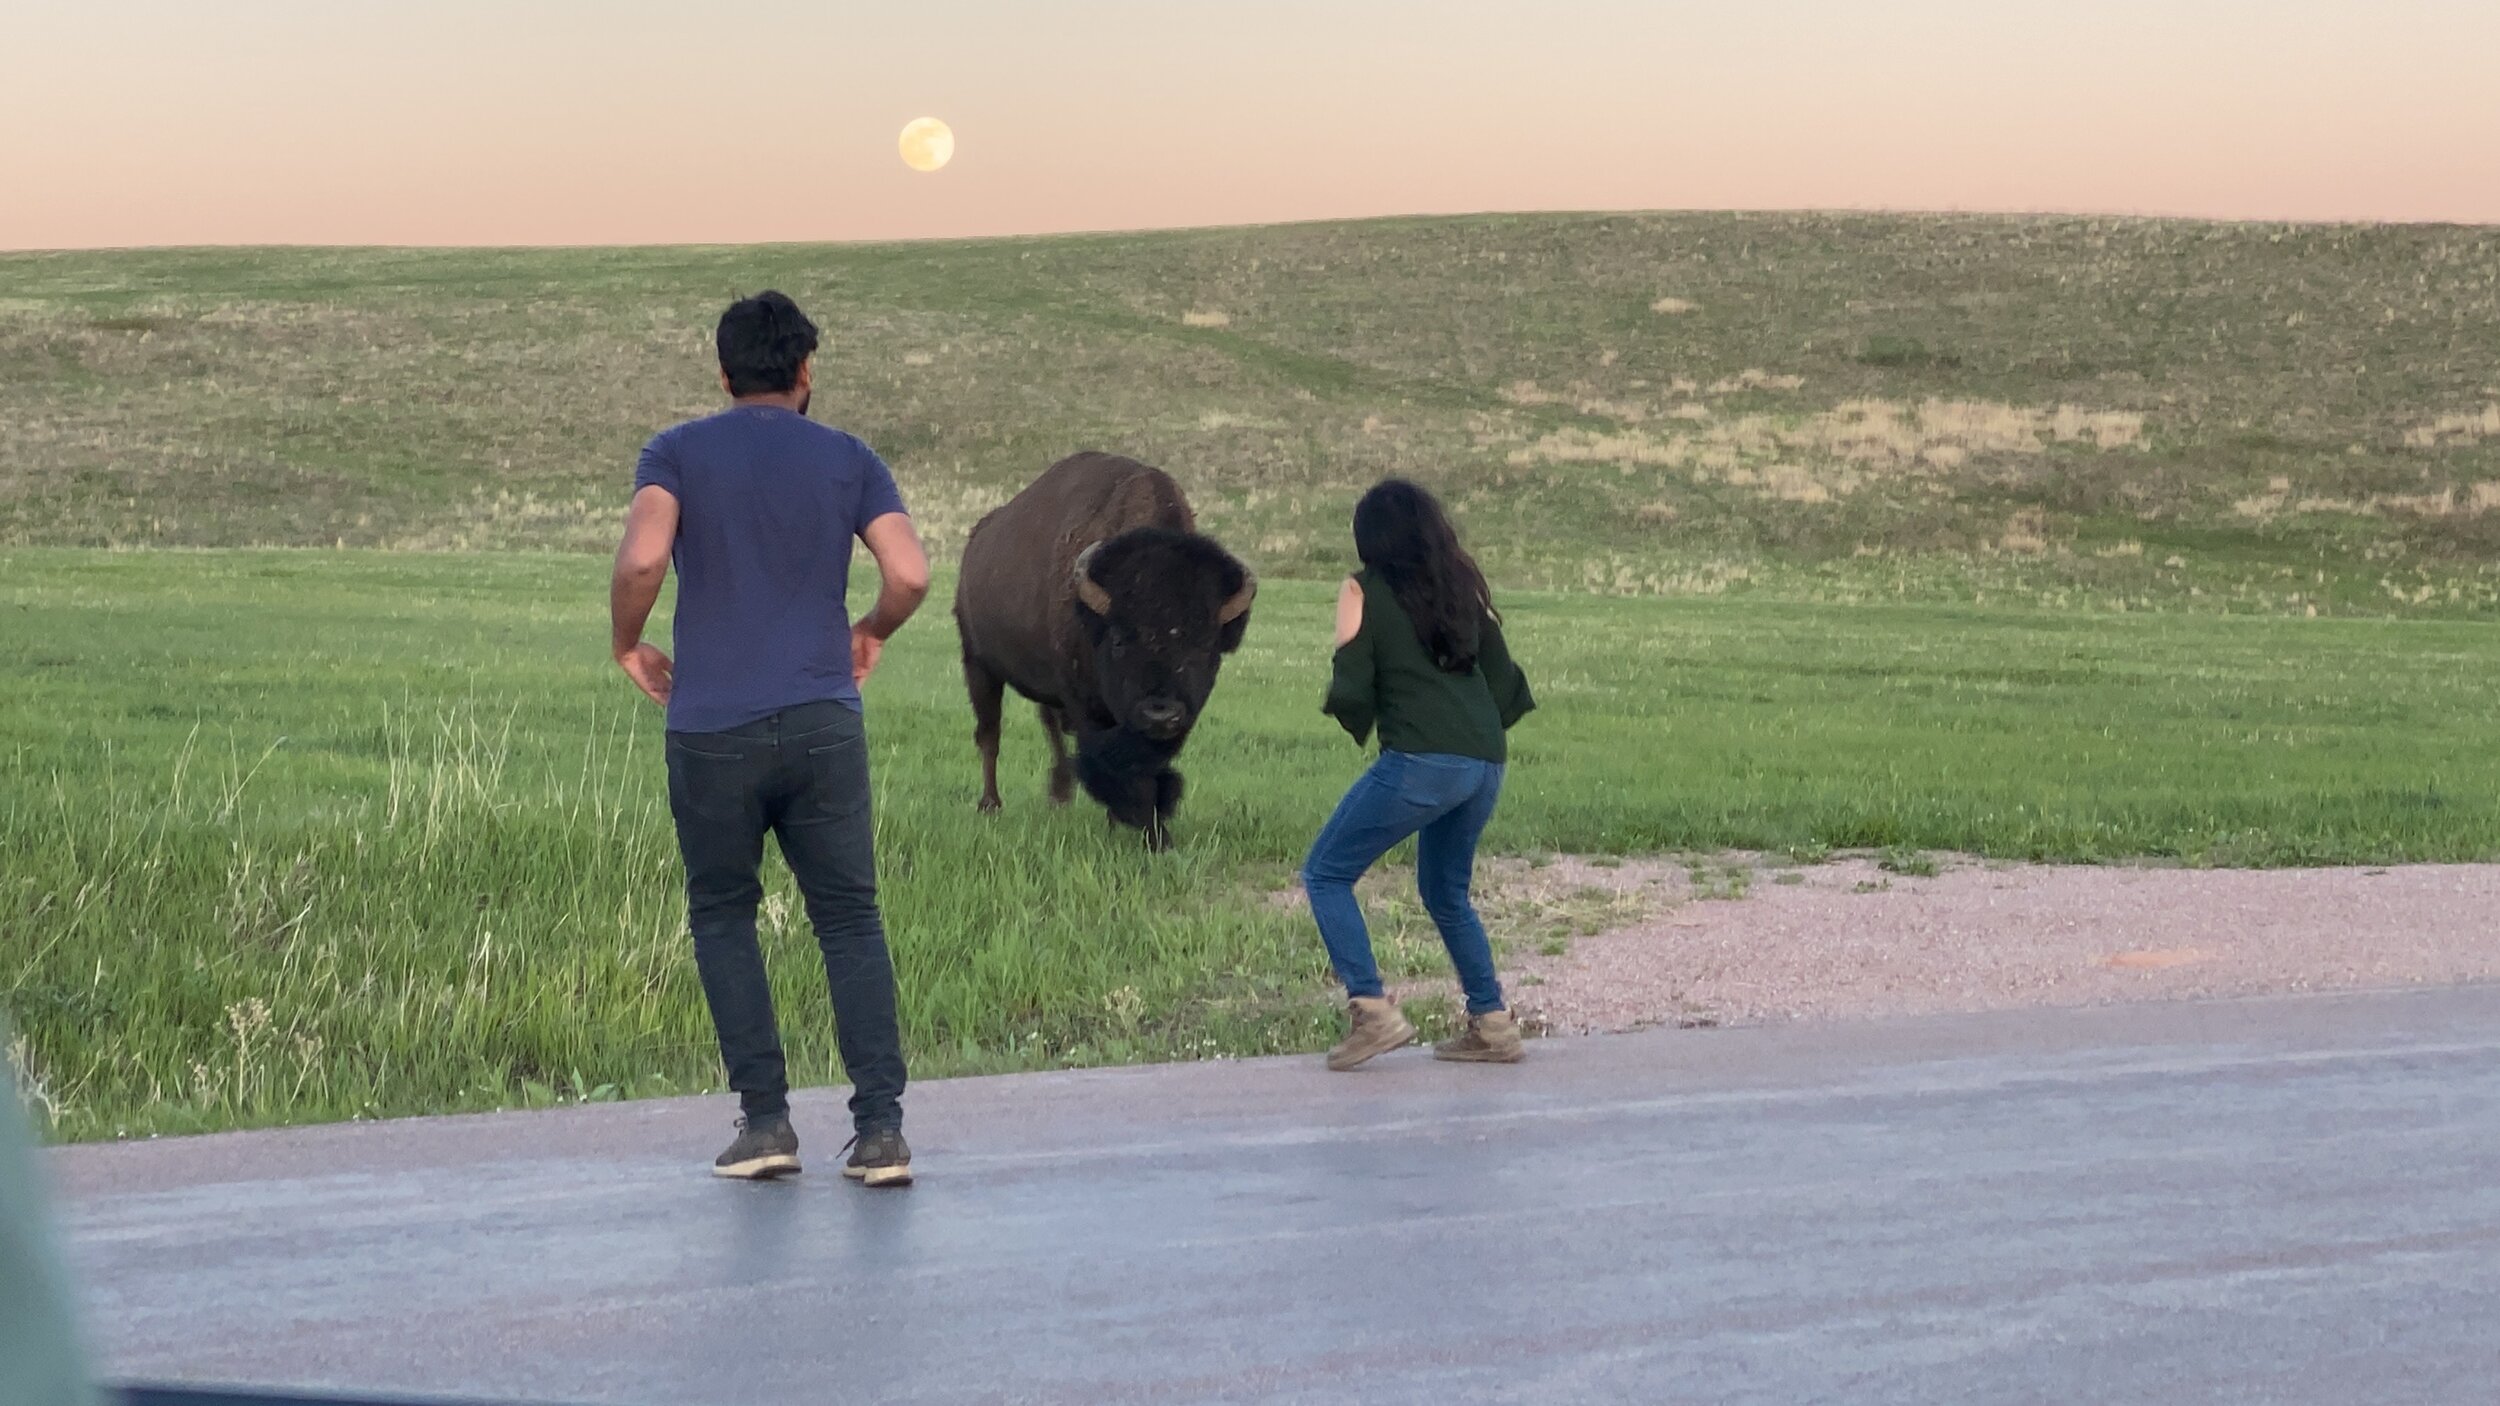 This is why you don’t get close to wildlife!  This bison bluff charged (I know that’s a grizzly thing but it’s the best way to describe this) the girl to scare her off.  Could have easily hurt her if he wanted to.  5/25/21